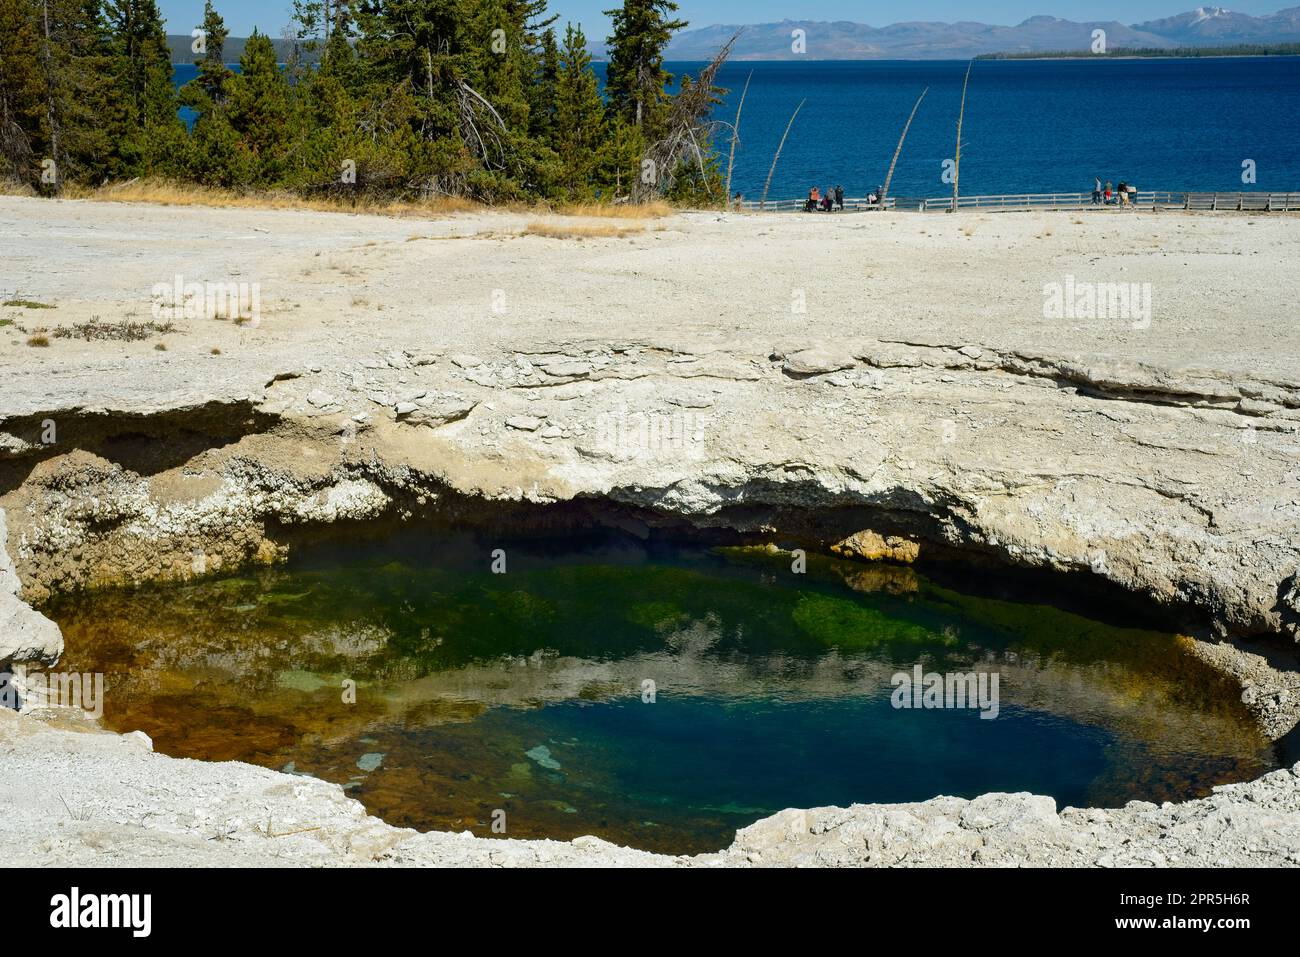 A colorful pool in the West Thumb Geyser Basin at Yellowstone National Park, with Yellowstone Lake in the background Stock Photo